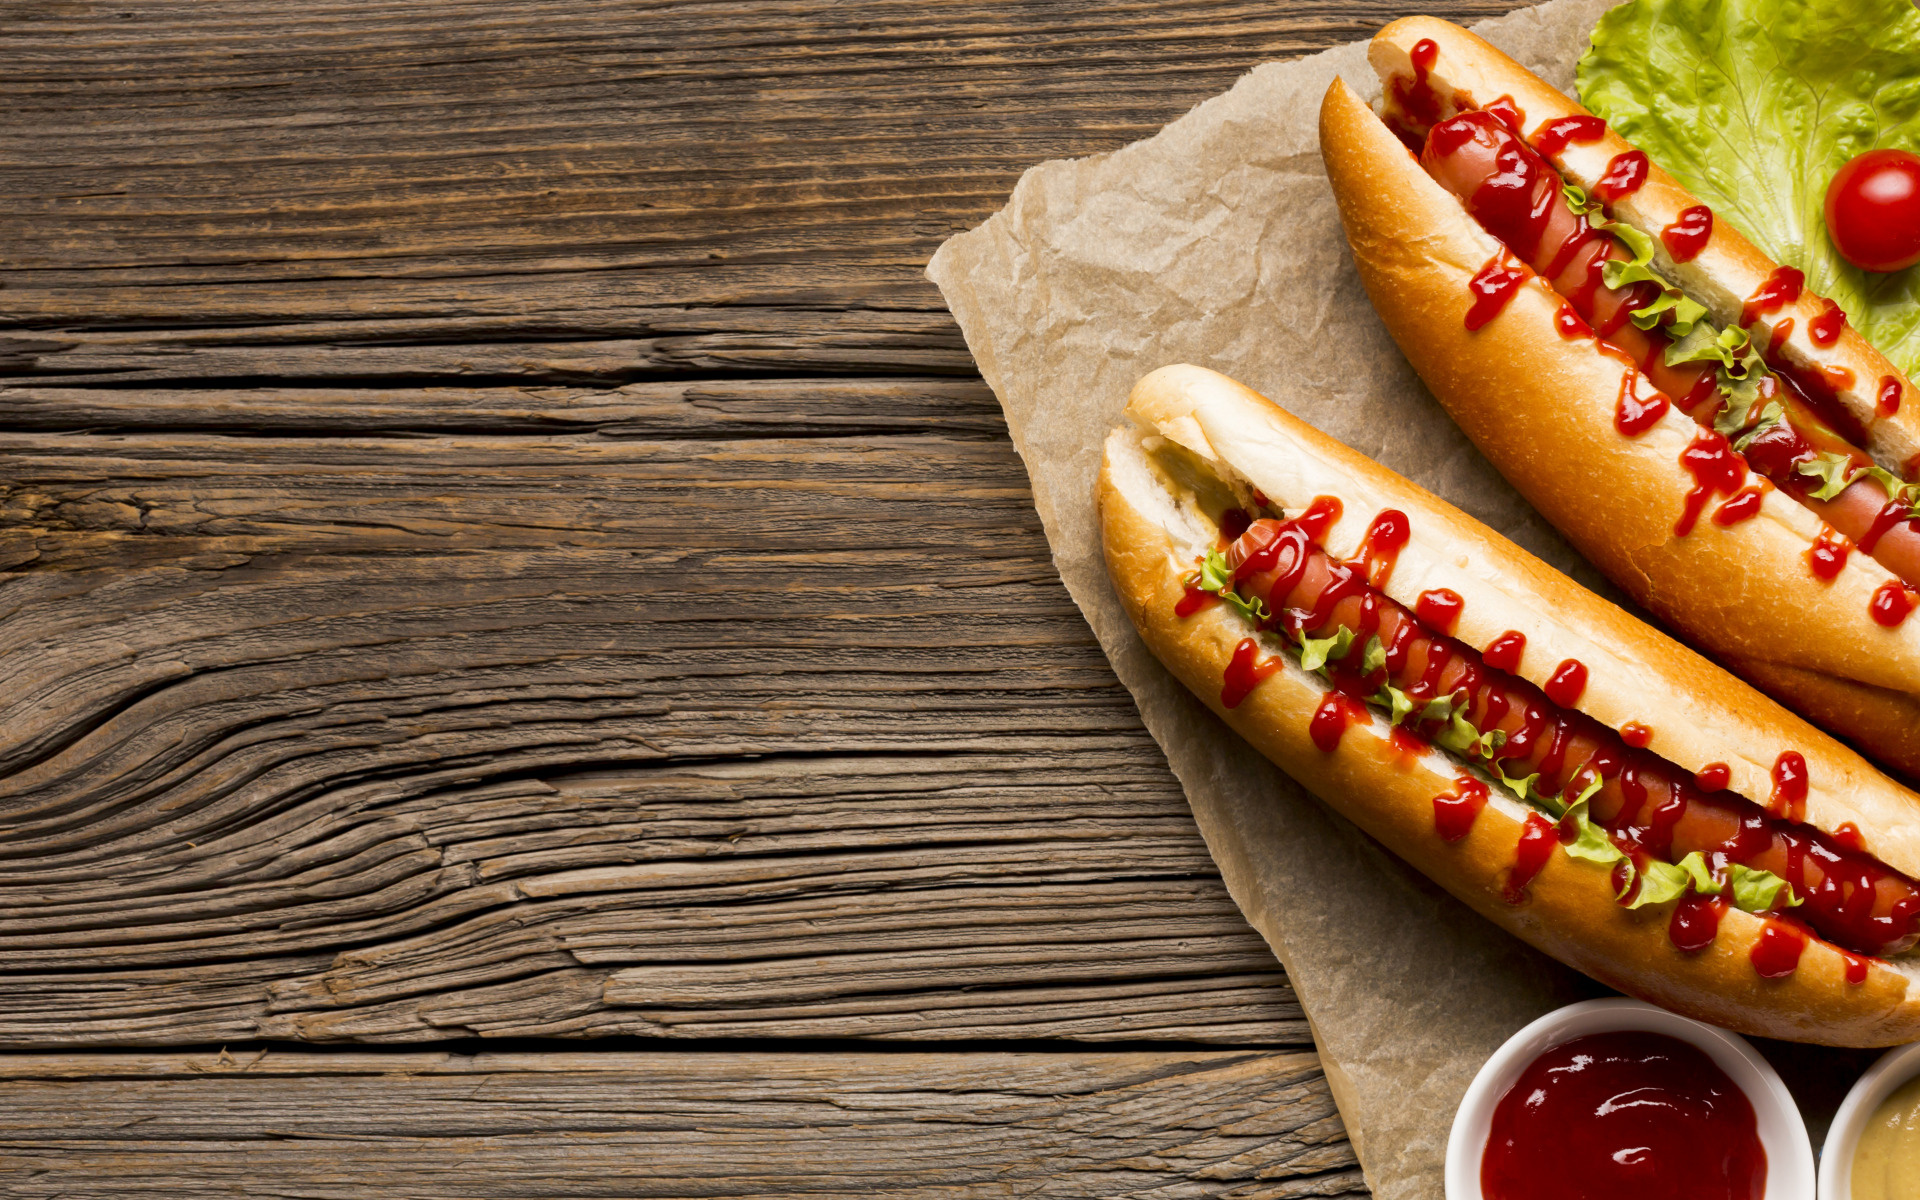 Hot dog with sauces, Tantalizing toppings, Savory sausage, Wooden backdrop, 1920x1200 HD Desktop